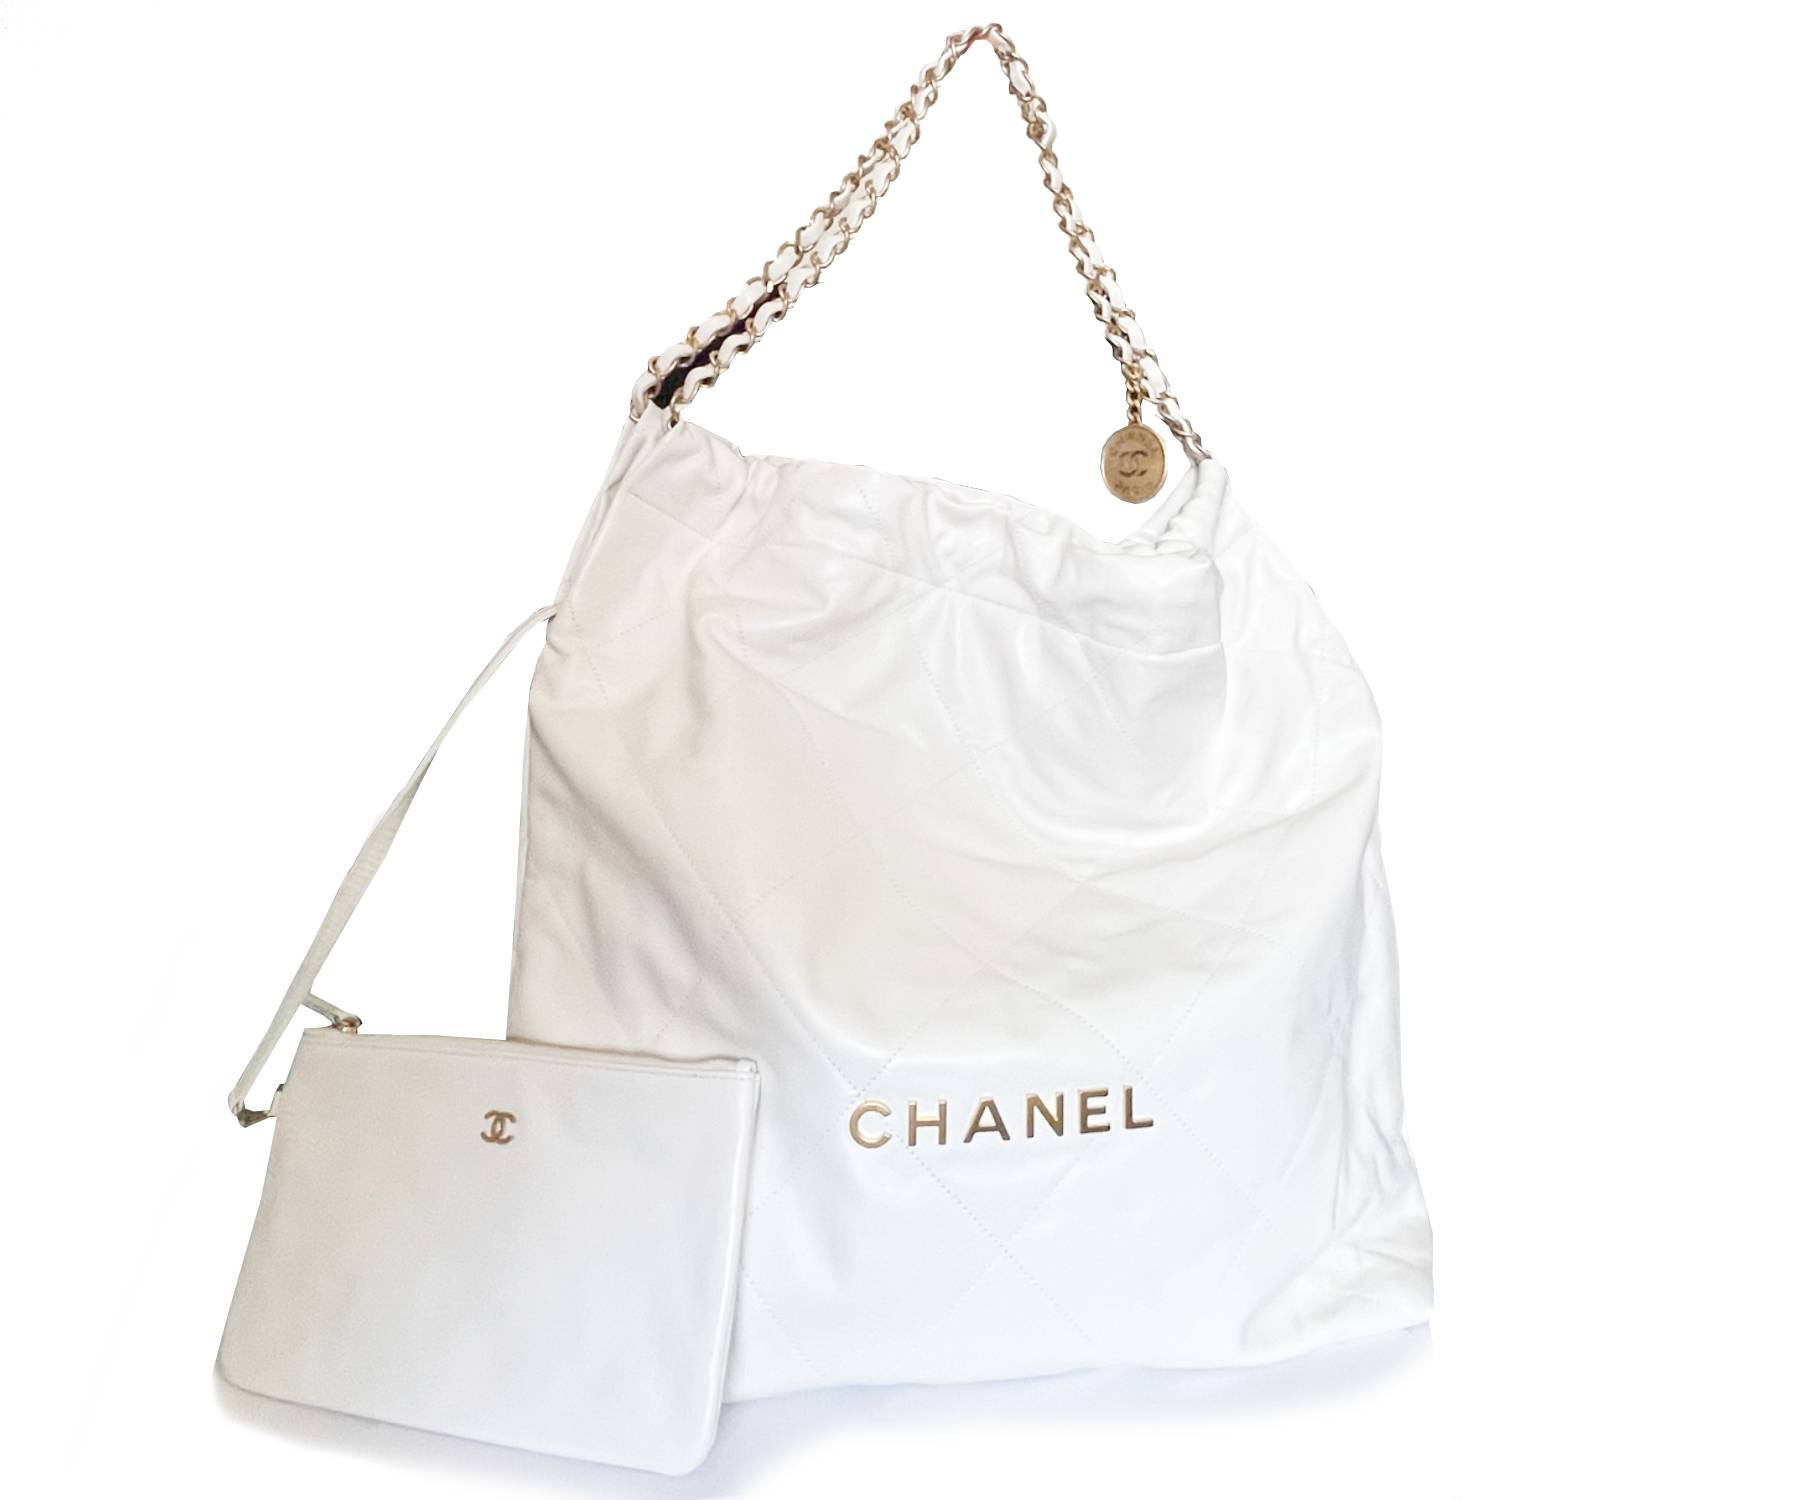 Chanel 22 bag with white letters : r/Godfactory